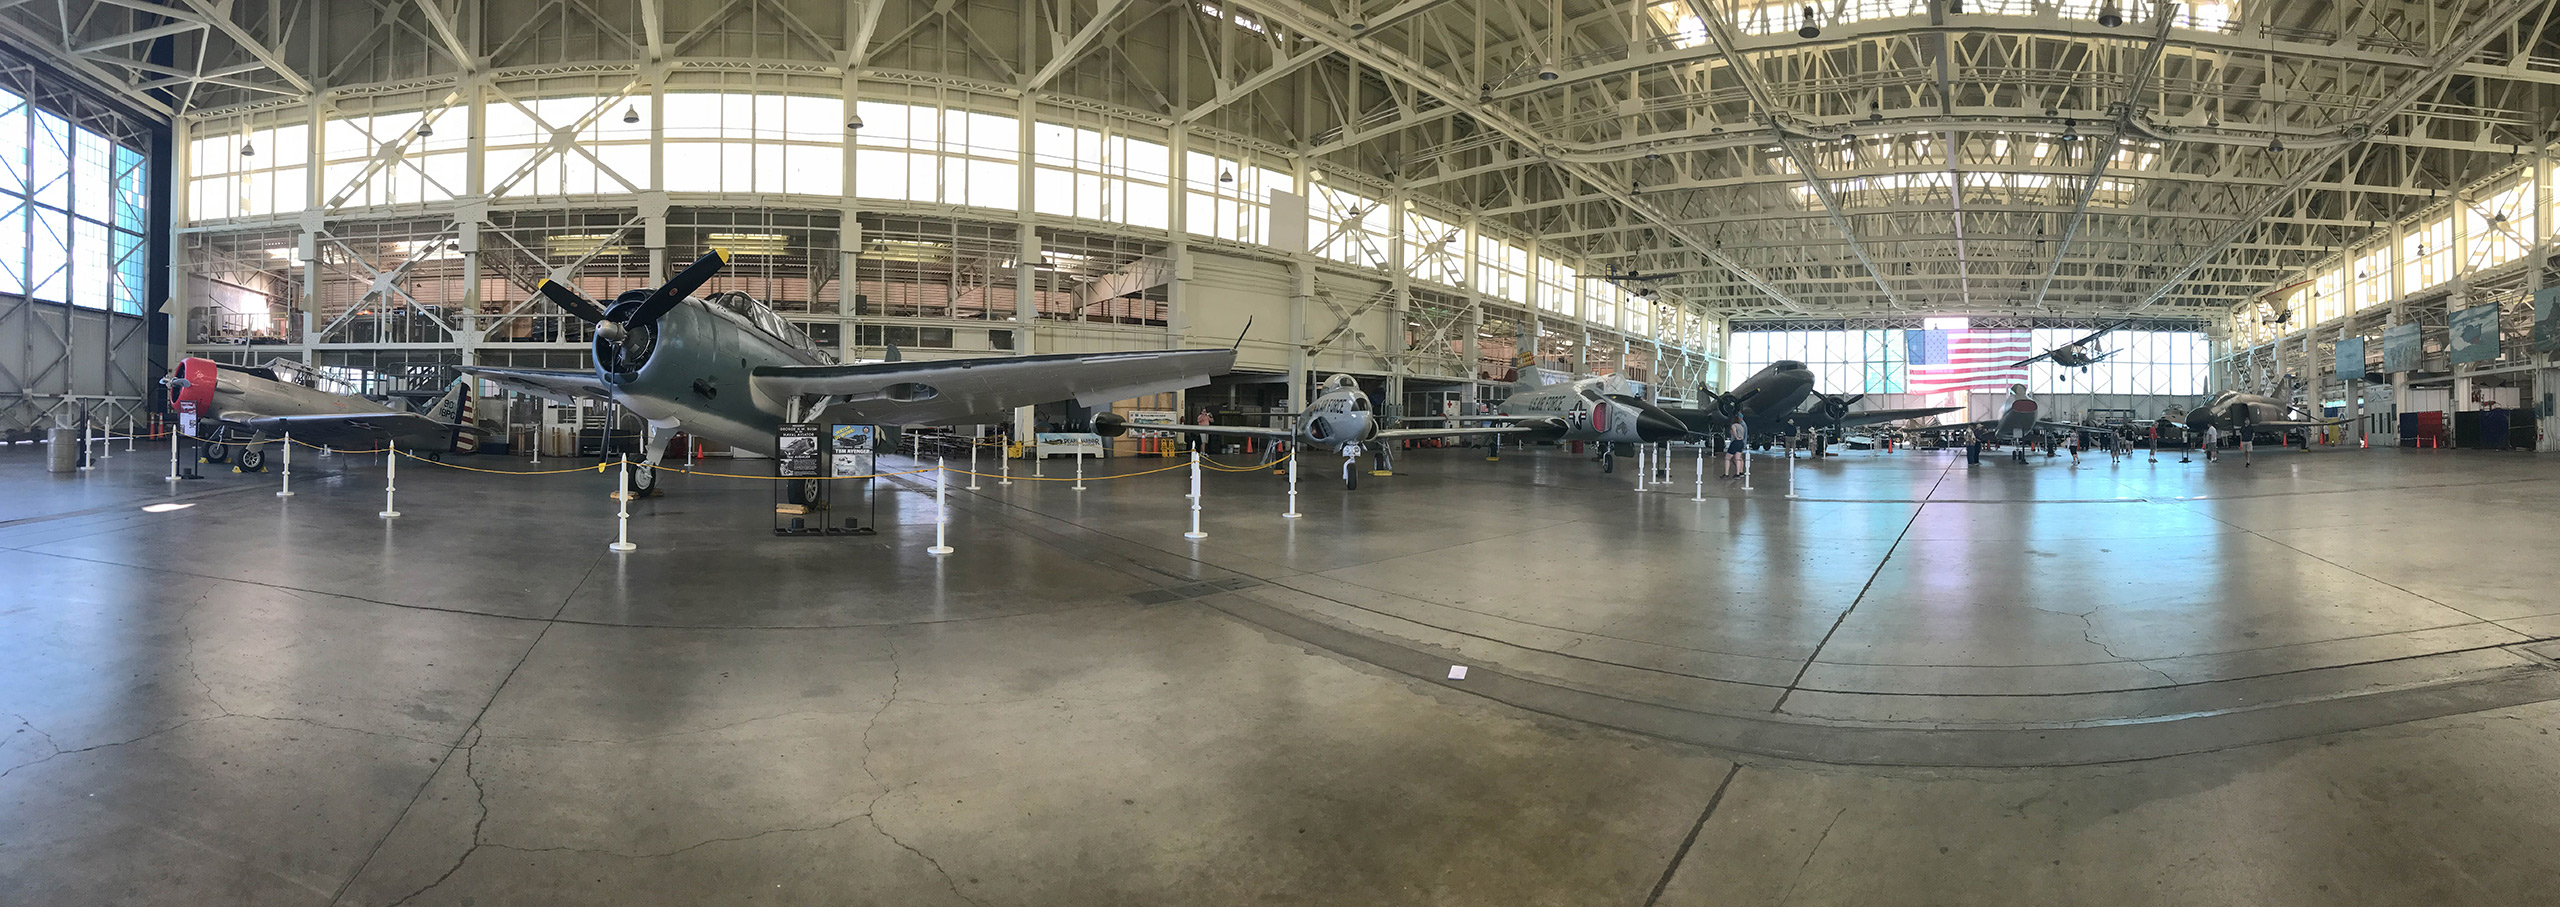 Top 8 Best Highlights About the Pearl Harbor Aviation Museum